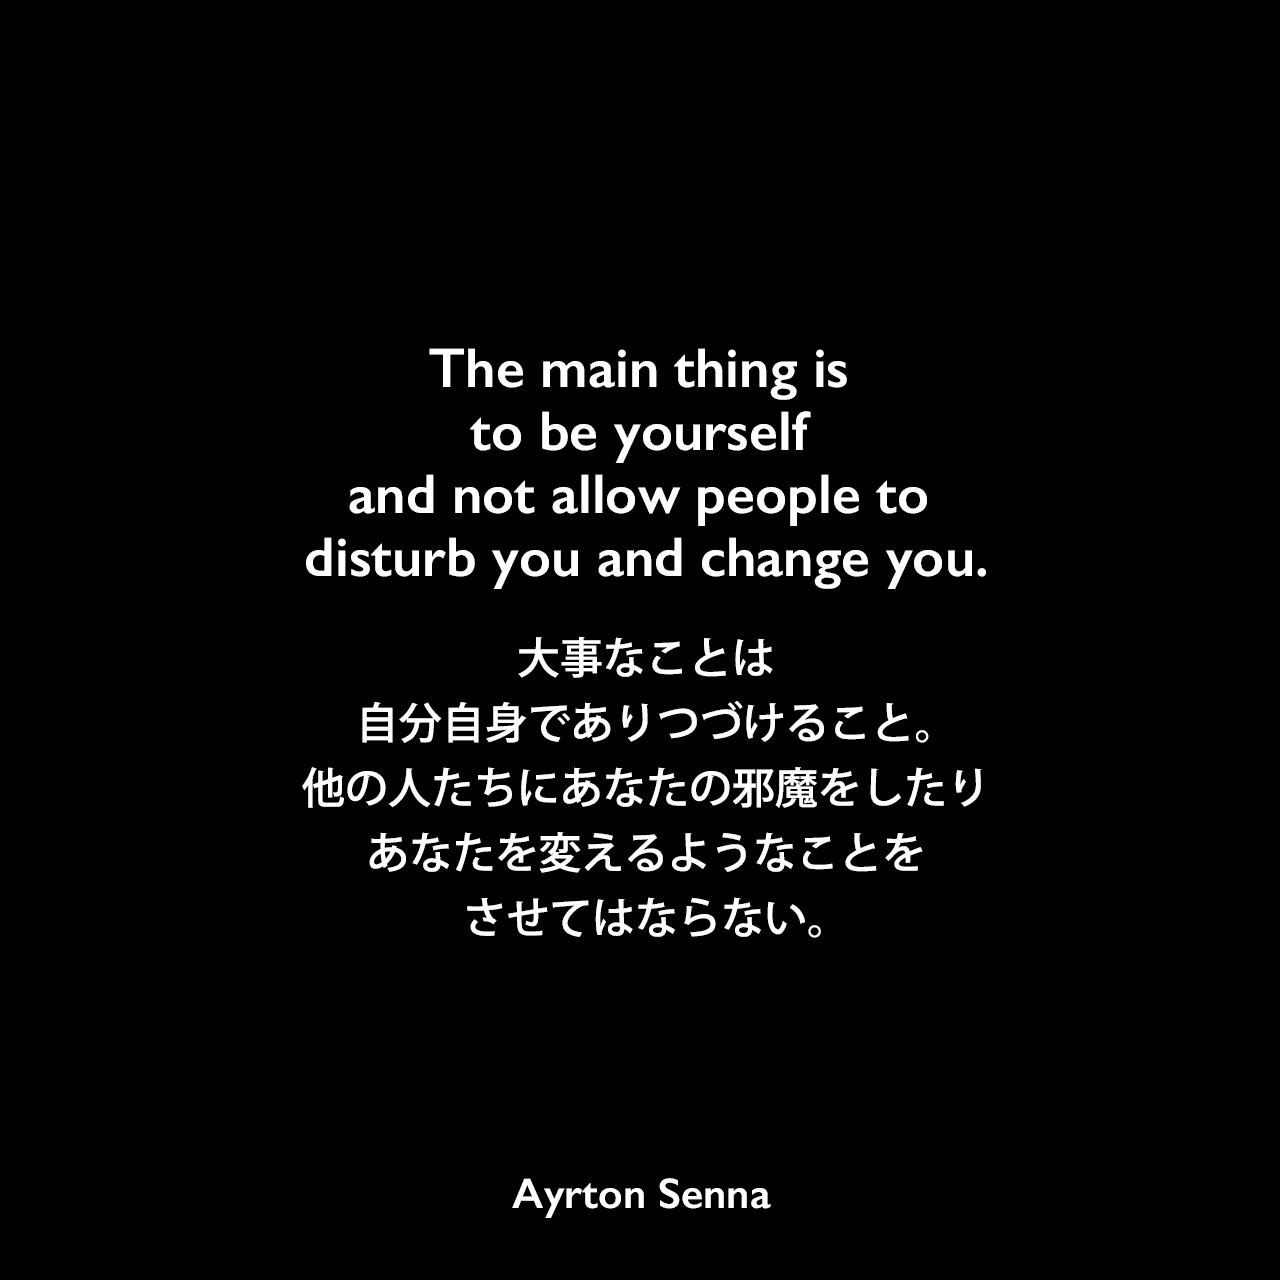 The main thing is to be yourself and not allow people to disturb you and change you.大事なことは、自分自身でありつづけること。他の人たちにあなたの邪魔をしたり、あなたを変えるようなことをさせてはならない。